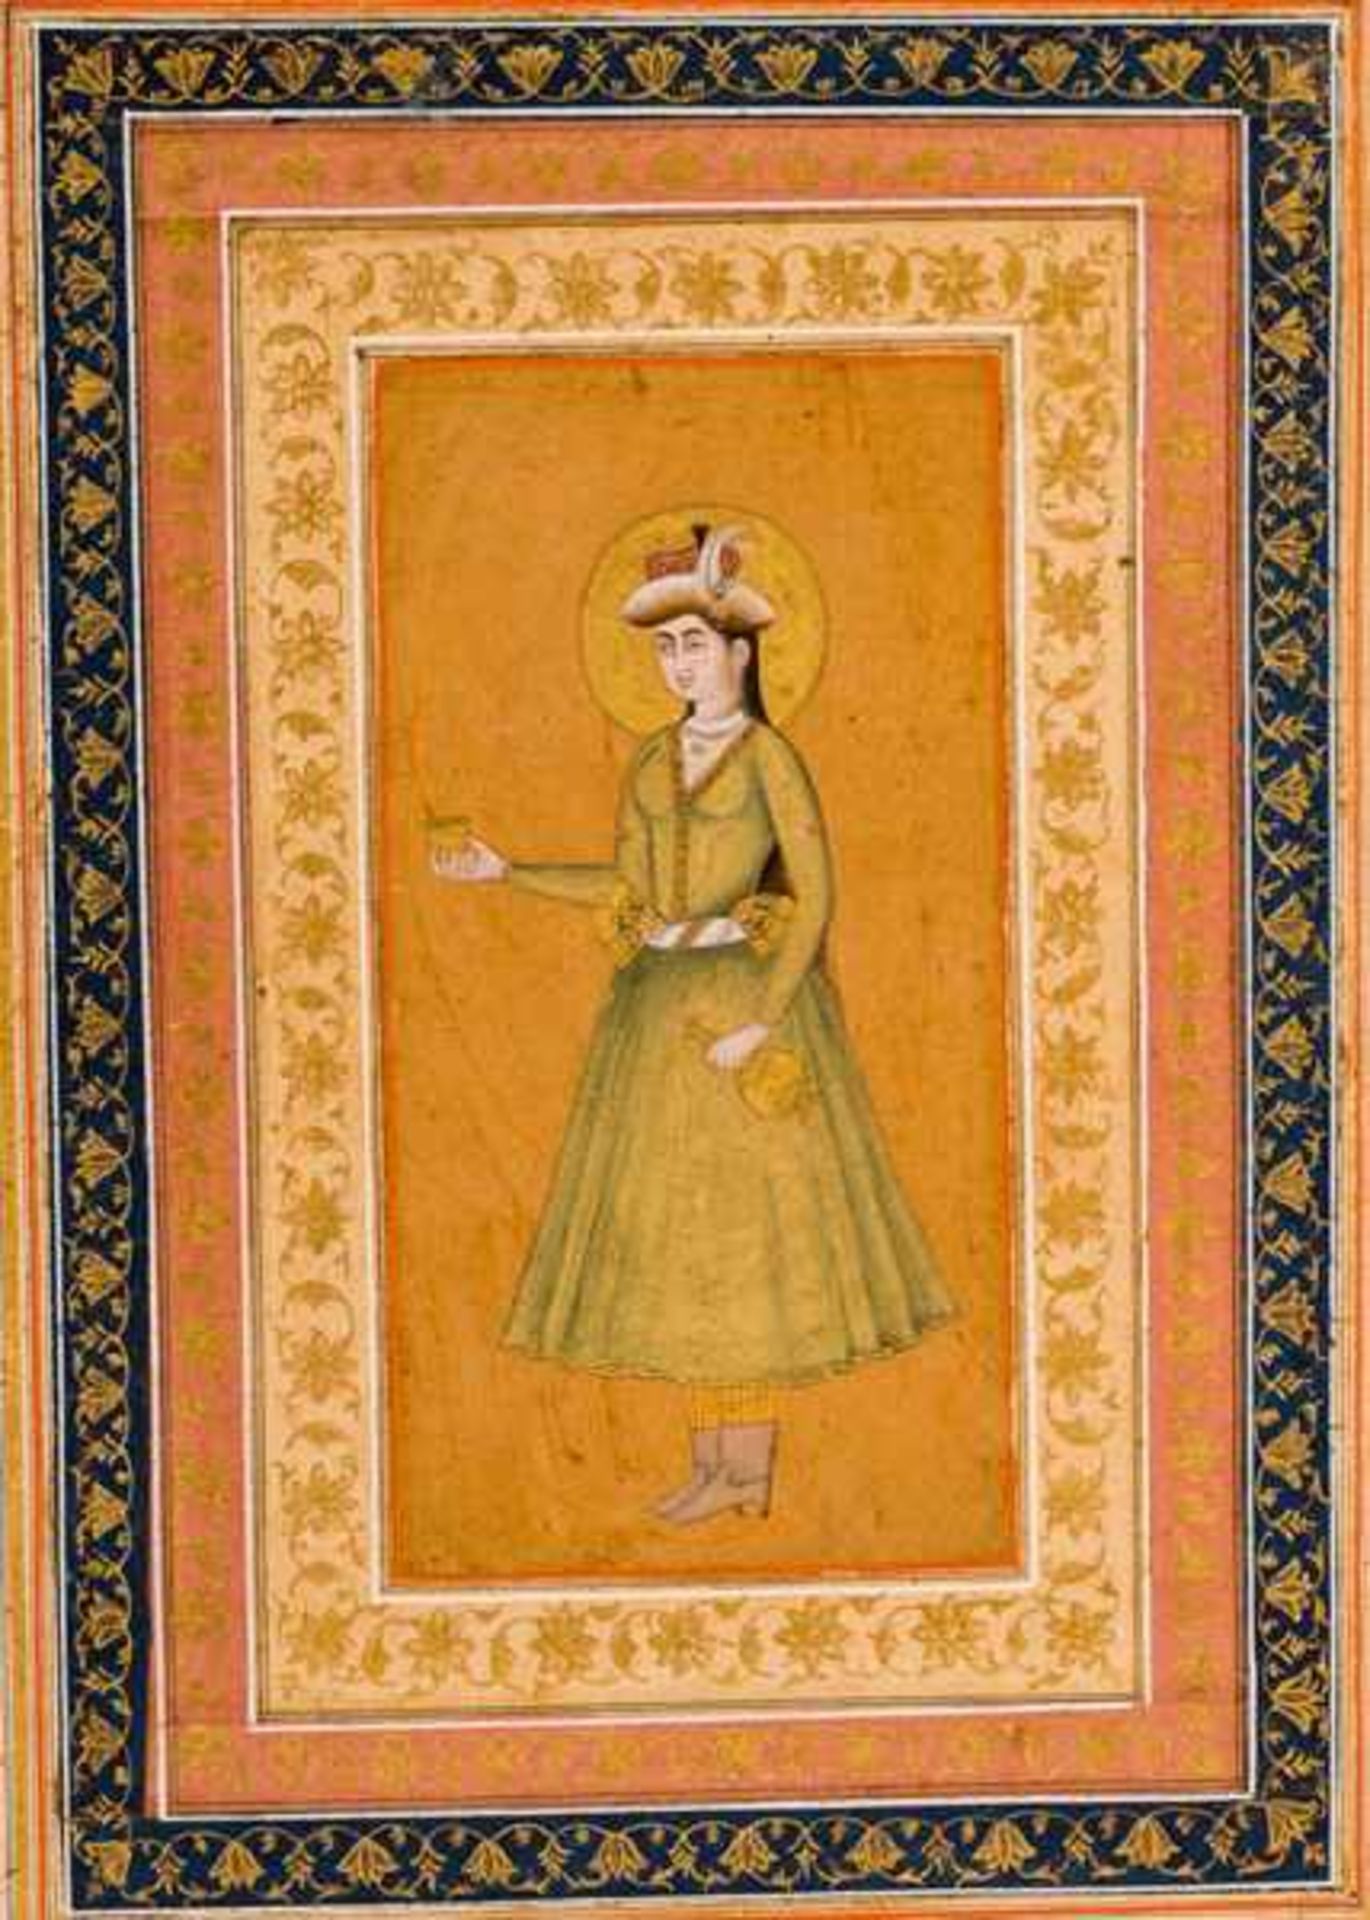 PRINCESS IN CAUCASIAN COURTLY CLOTHING Pain and gold on paper. India, possibly Lucknow, late 18th to